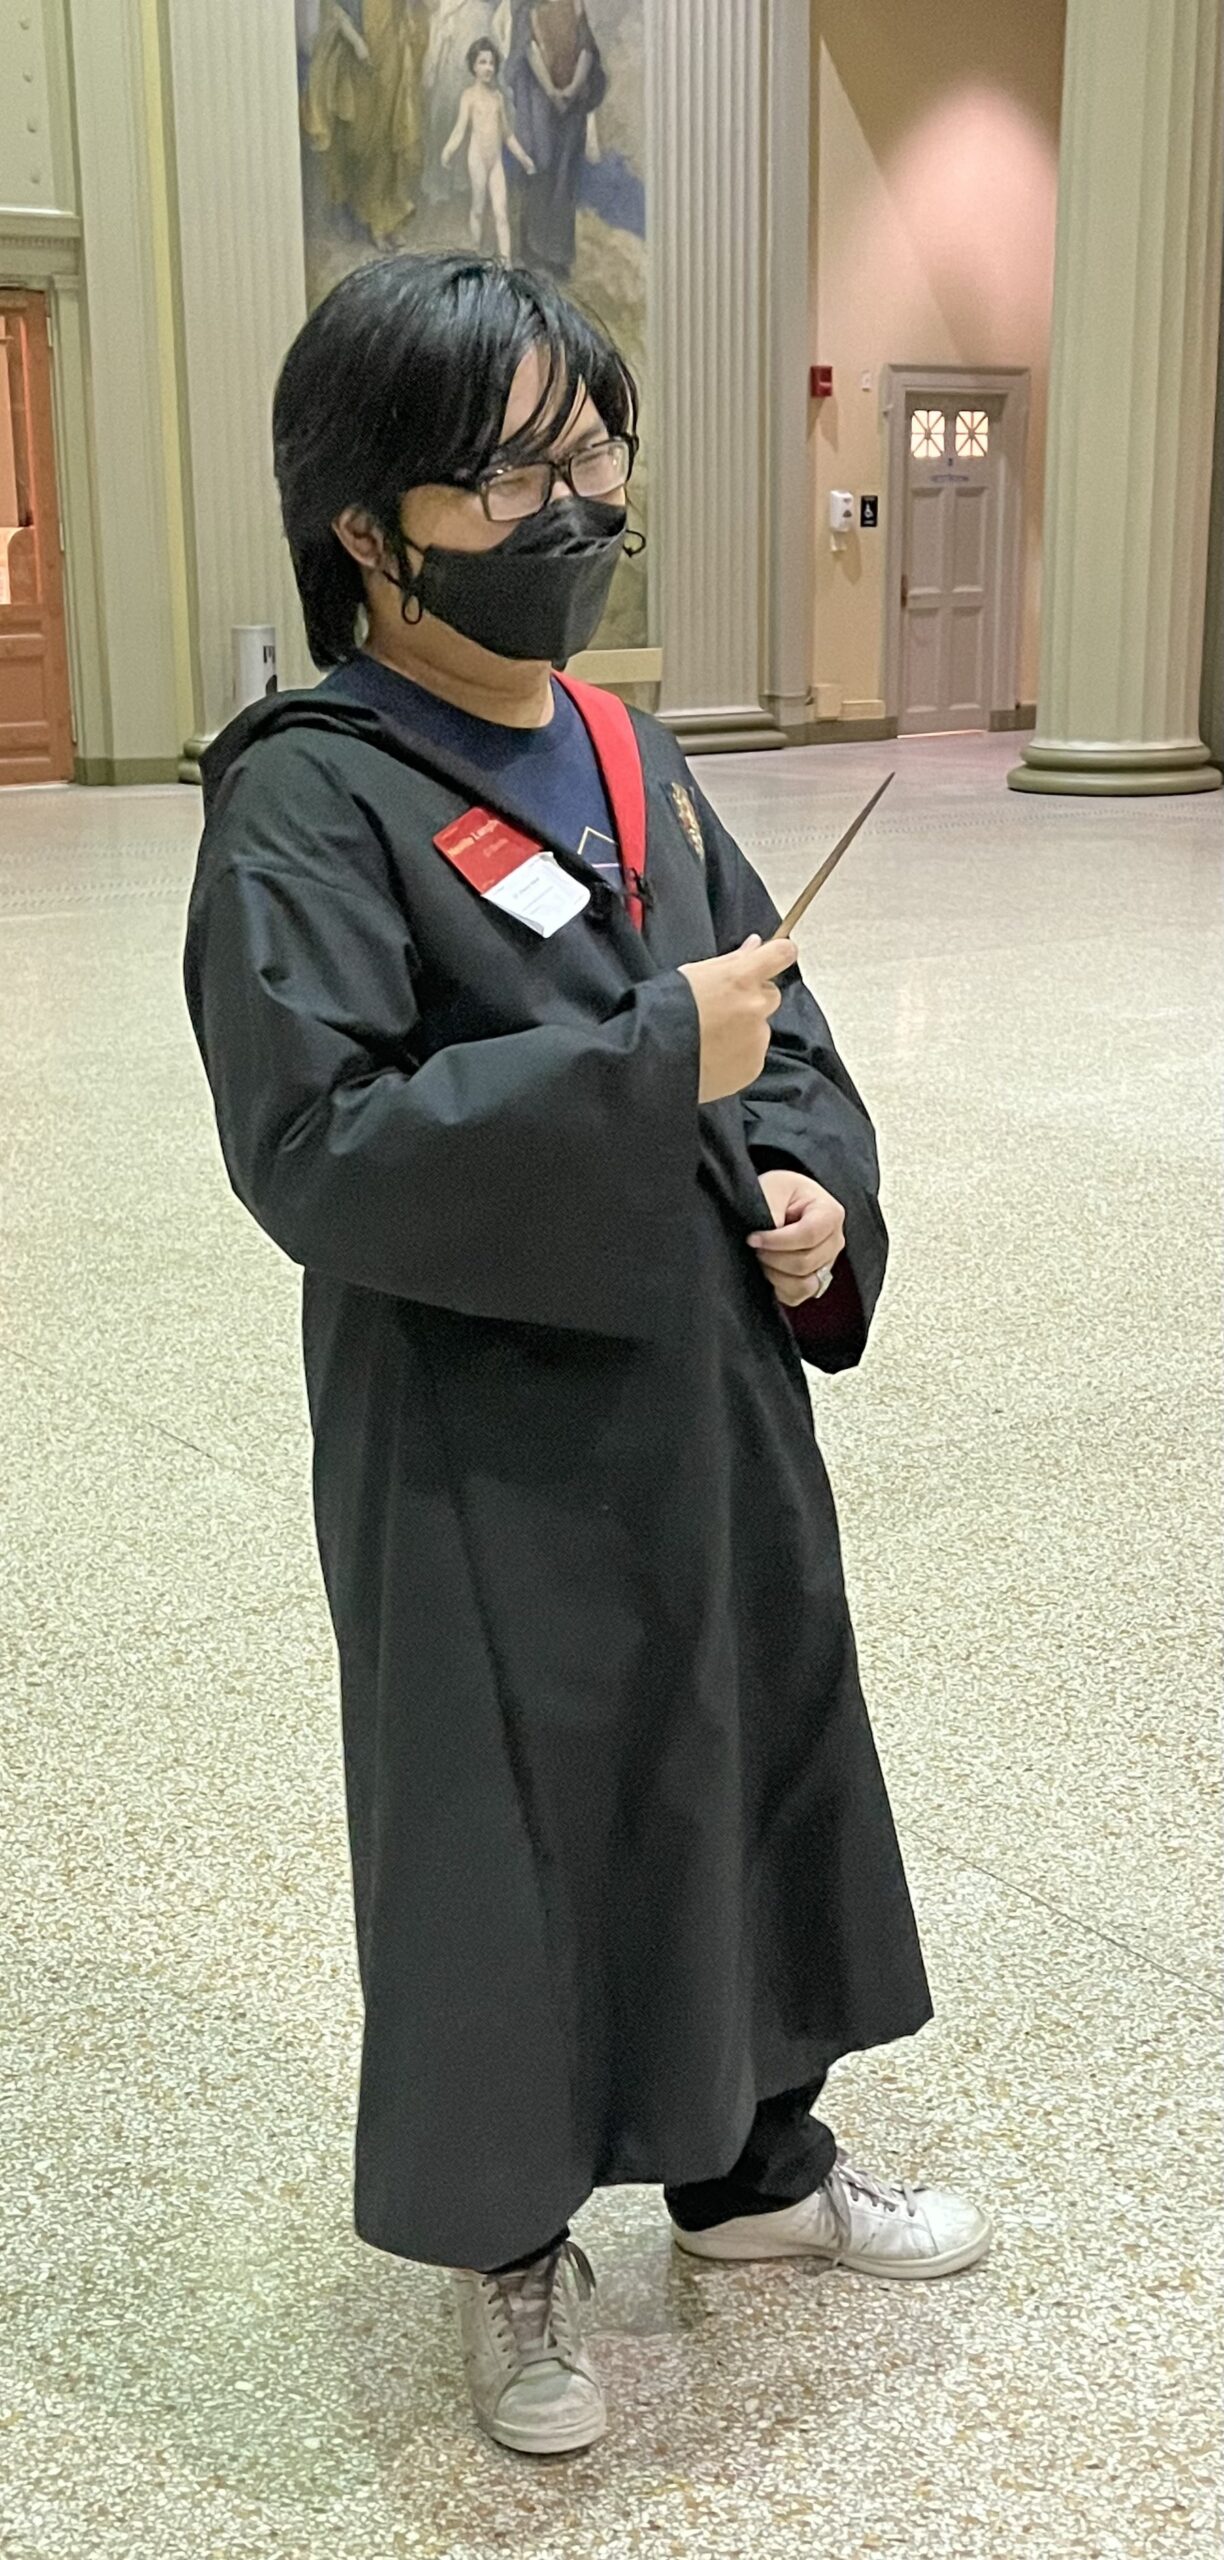 neville wearing robes and holding a wand